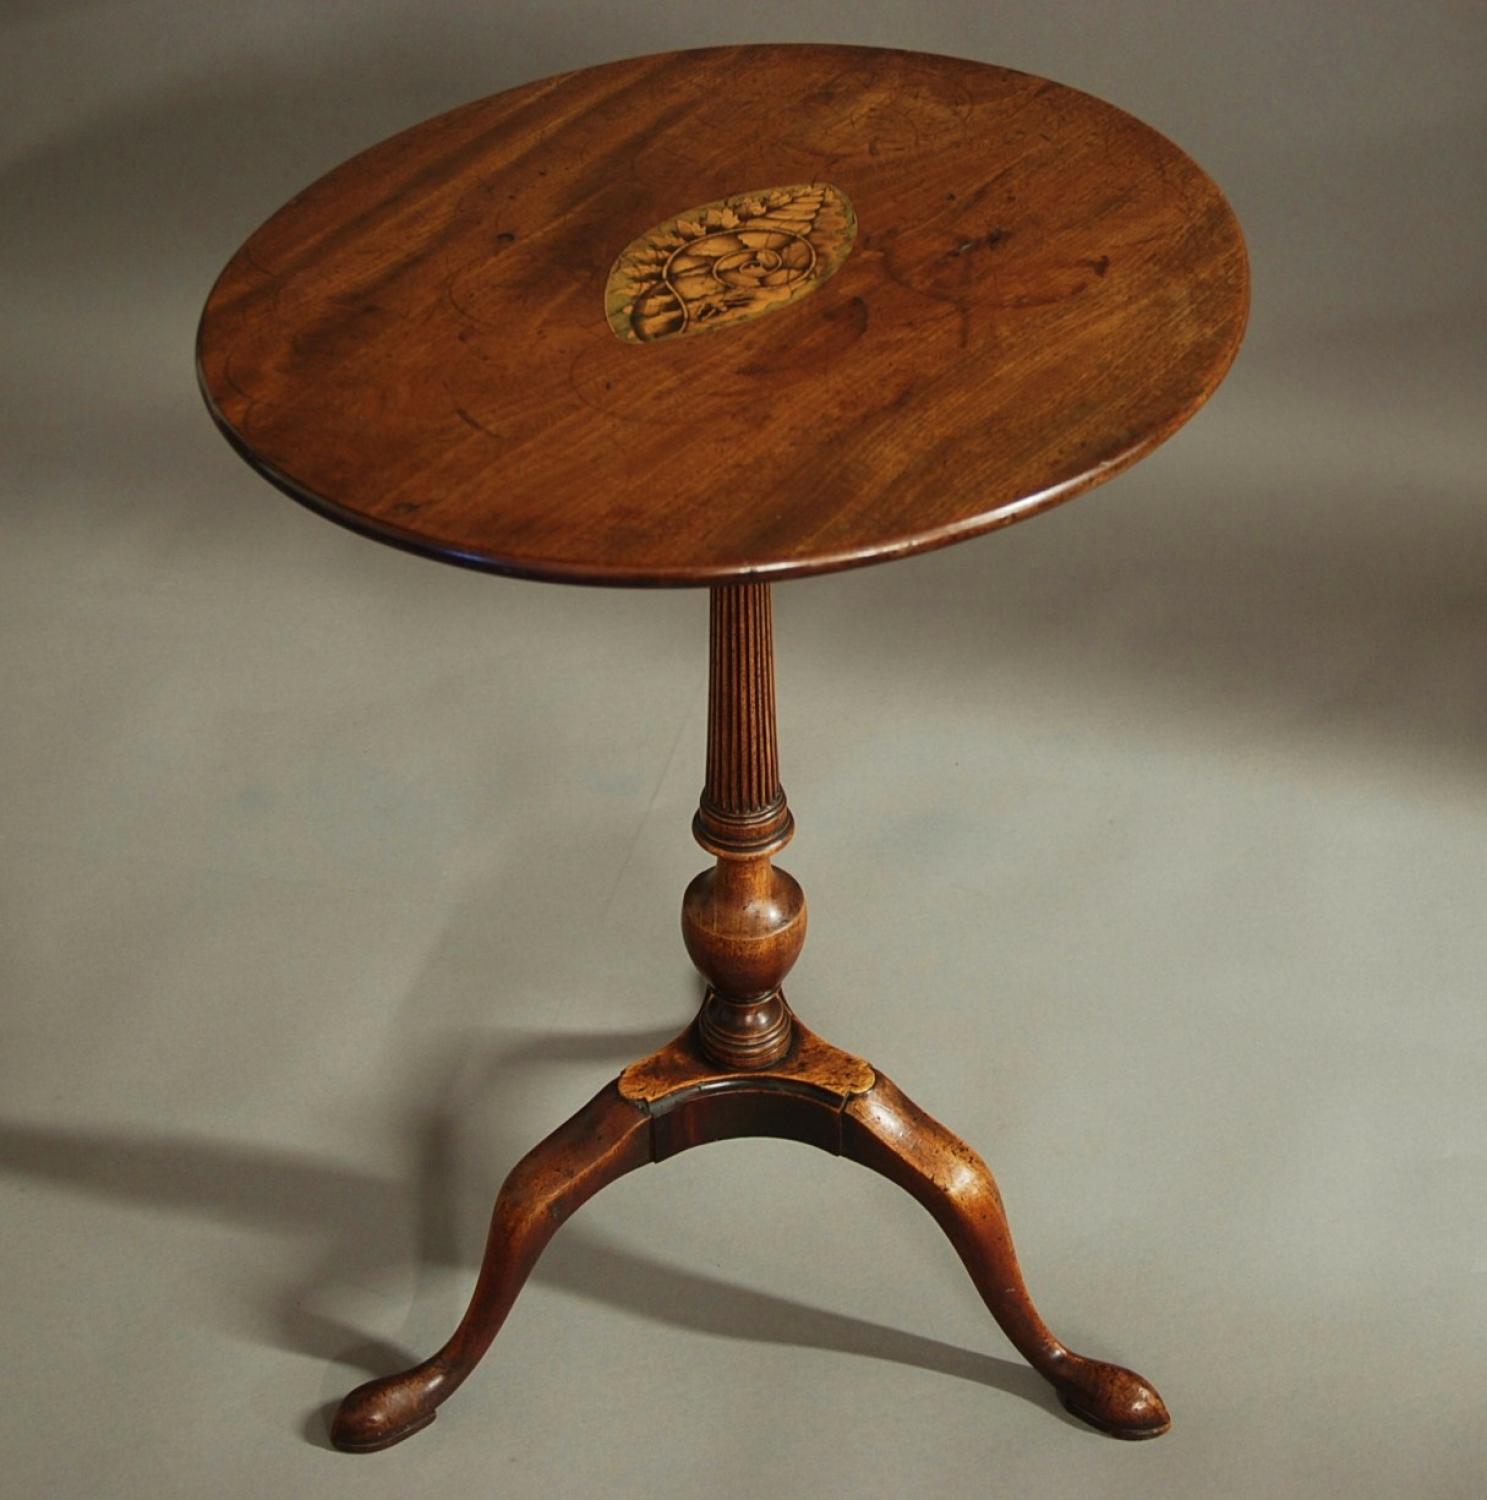 18th century tripod table of oval form